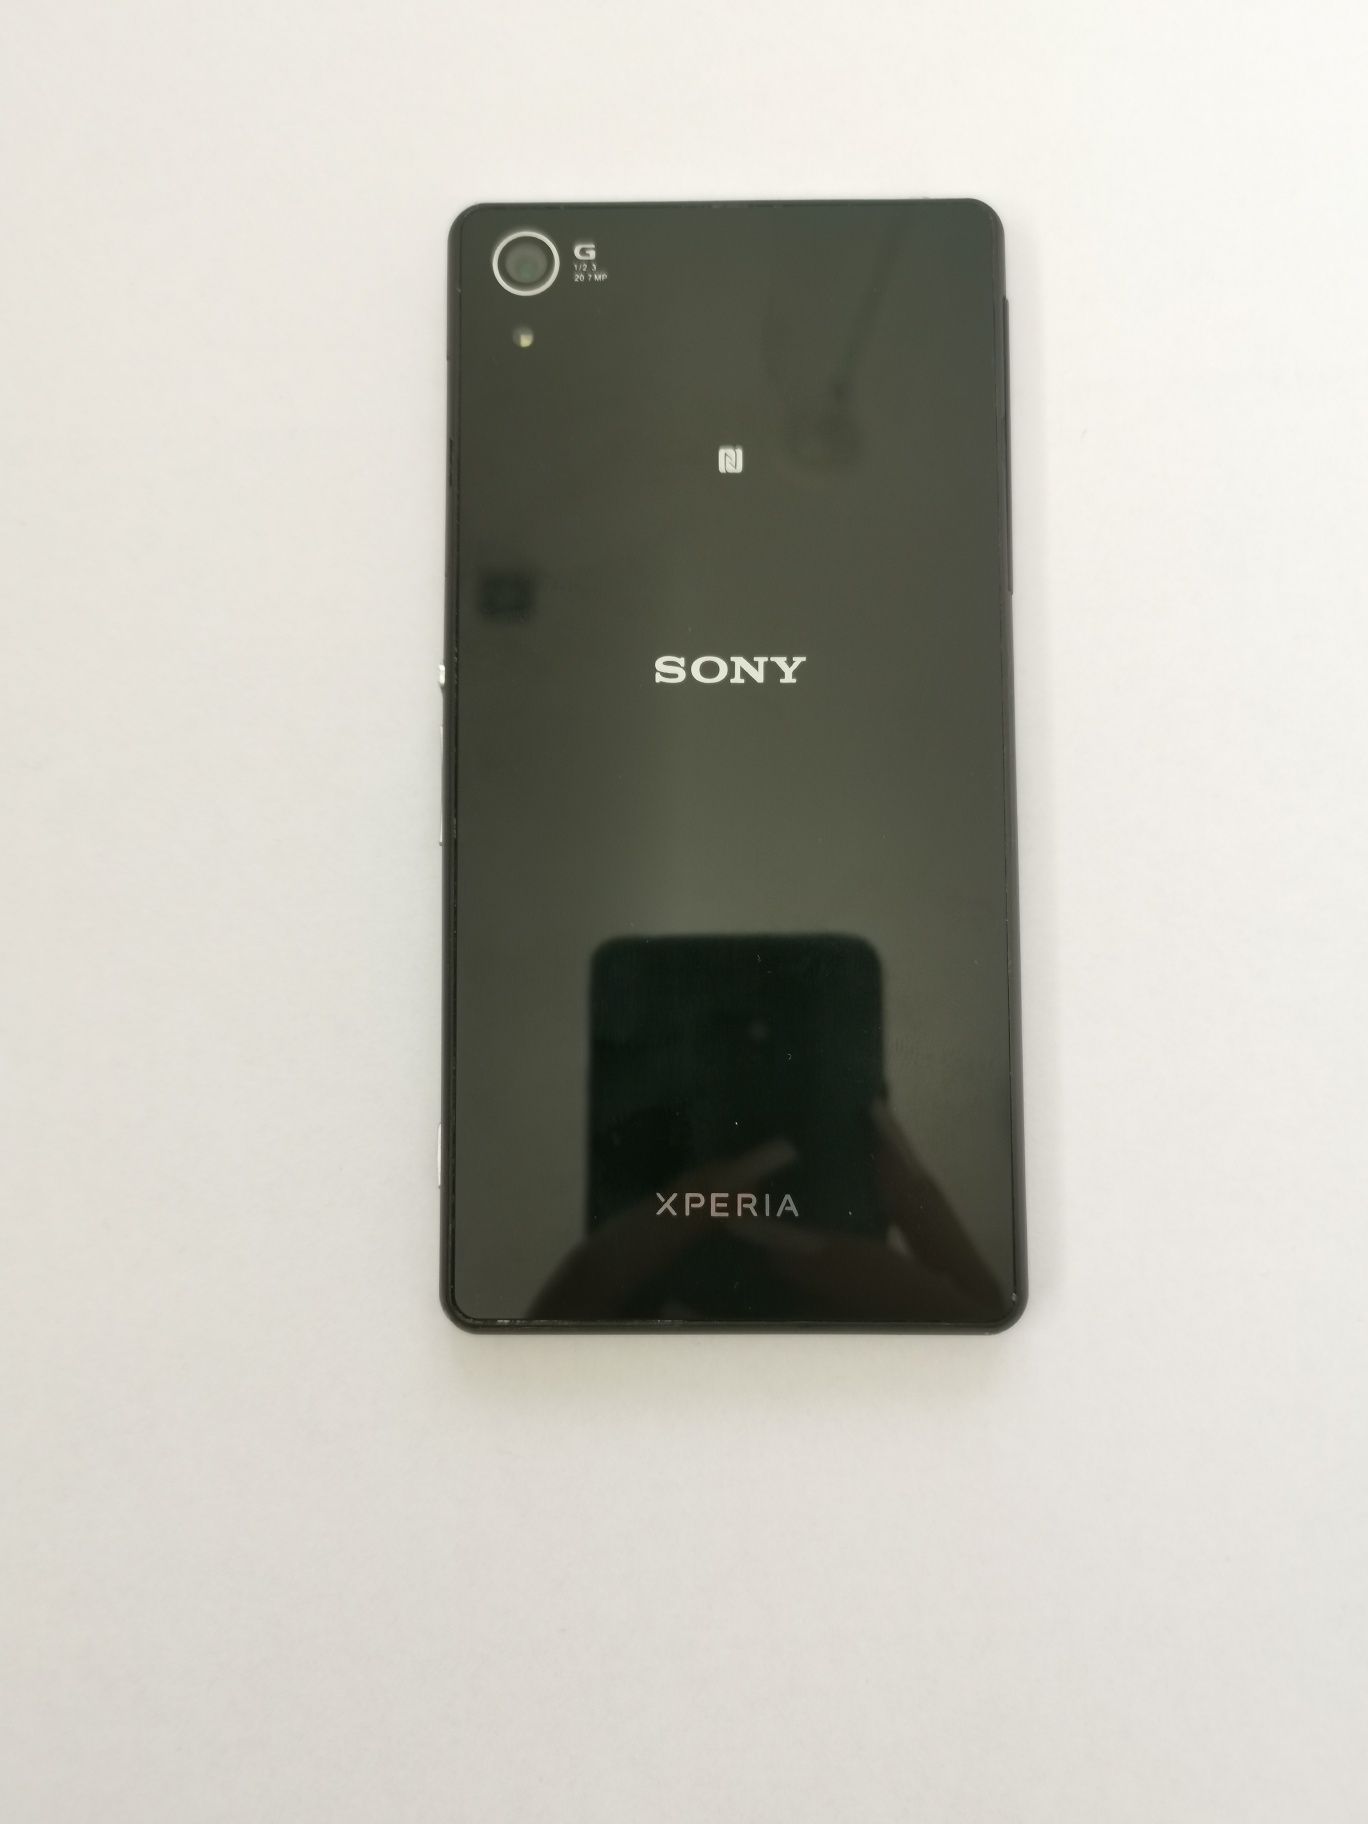 Sony Xperia D6503